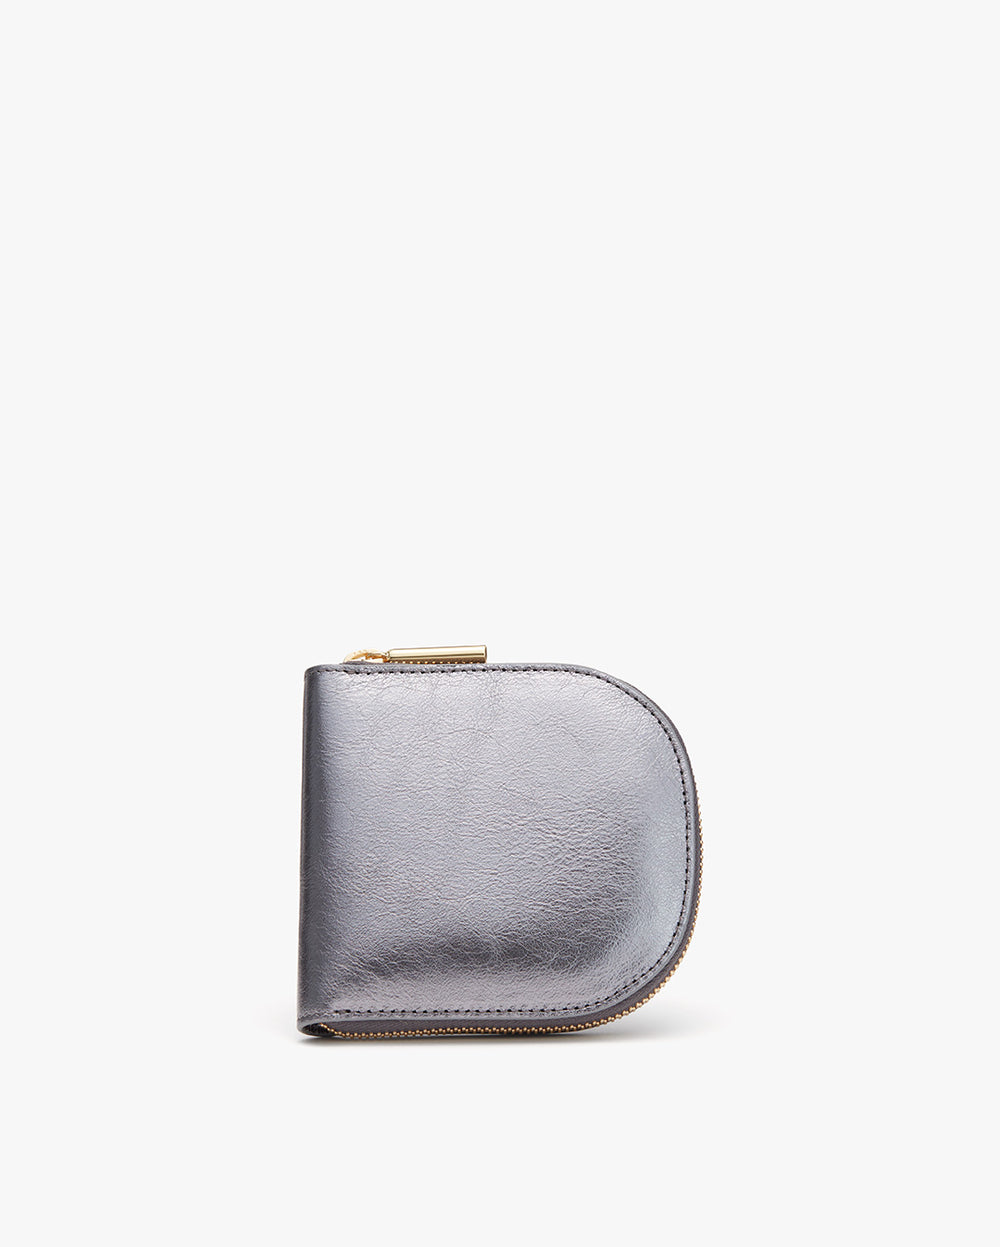 Small rounded zippered wallet with a metal bar on top.